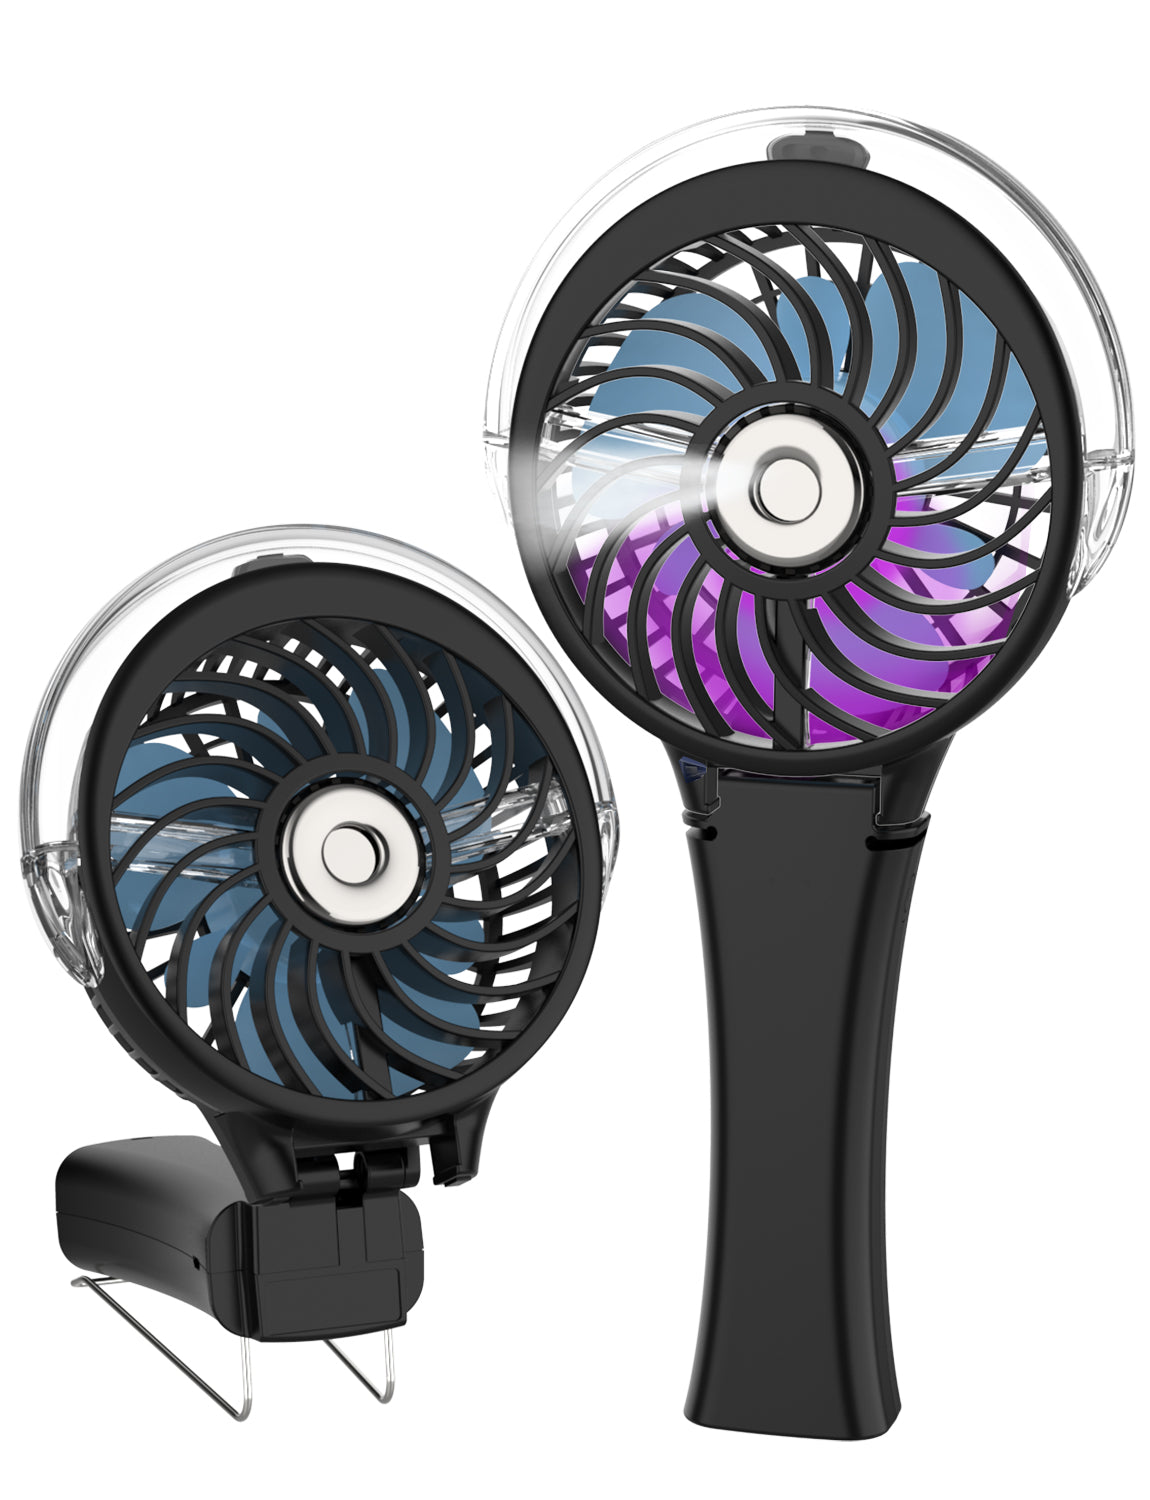 Colorful handheld fan with spray hydration function